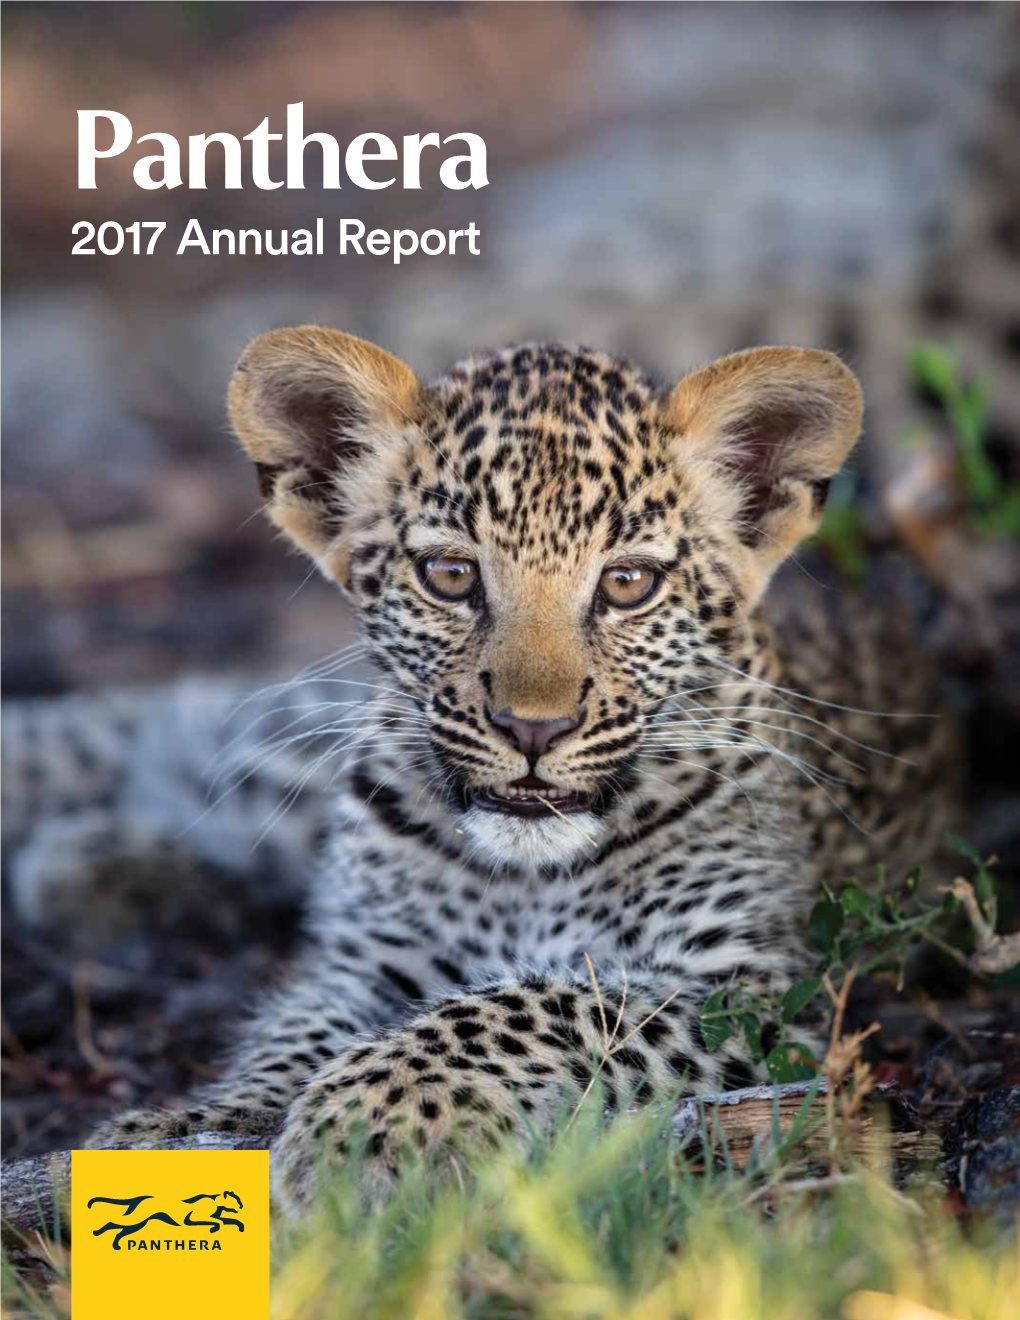 Panthera's 2017 Annual Report